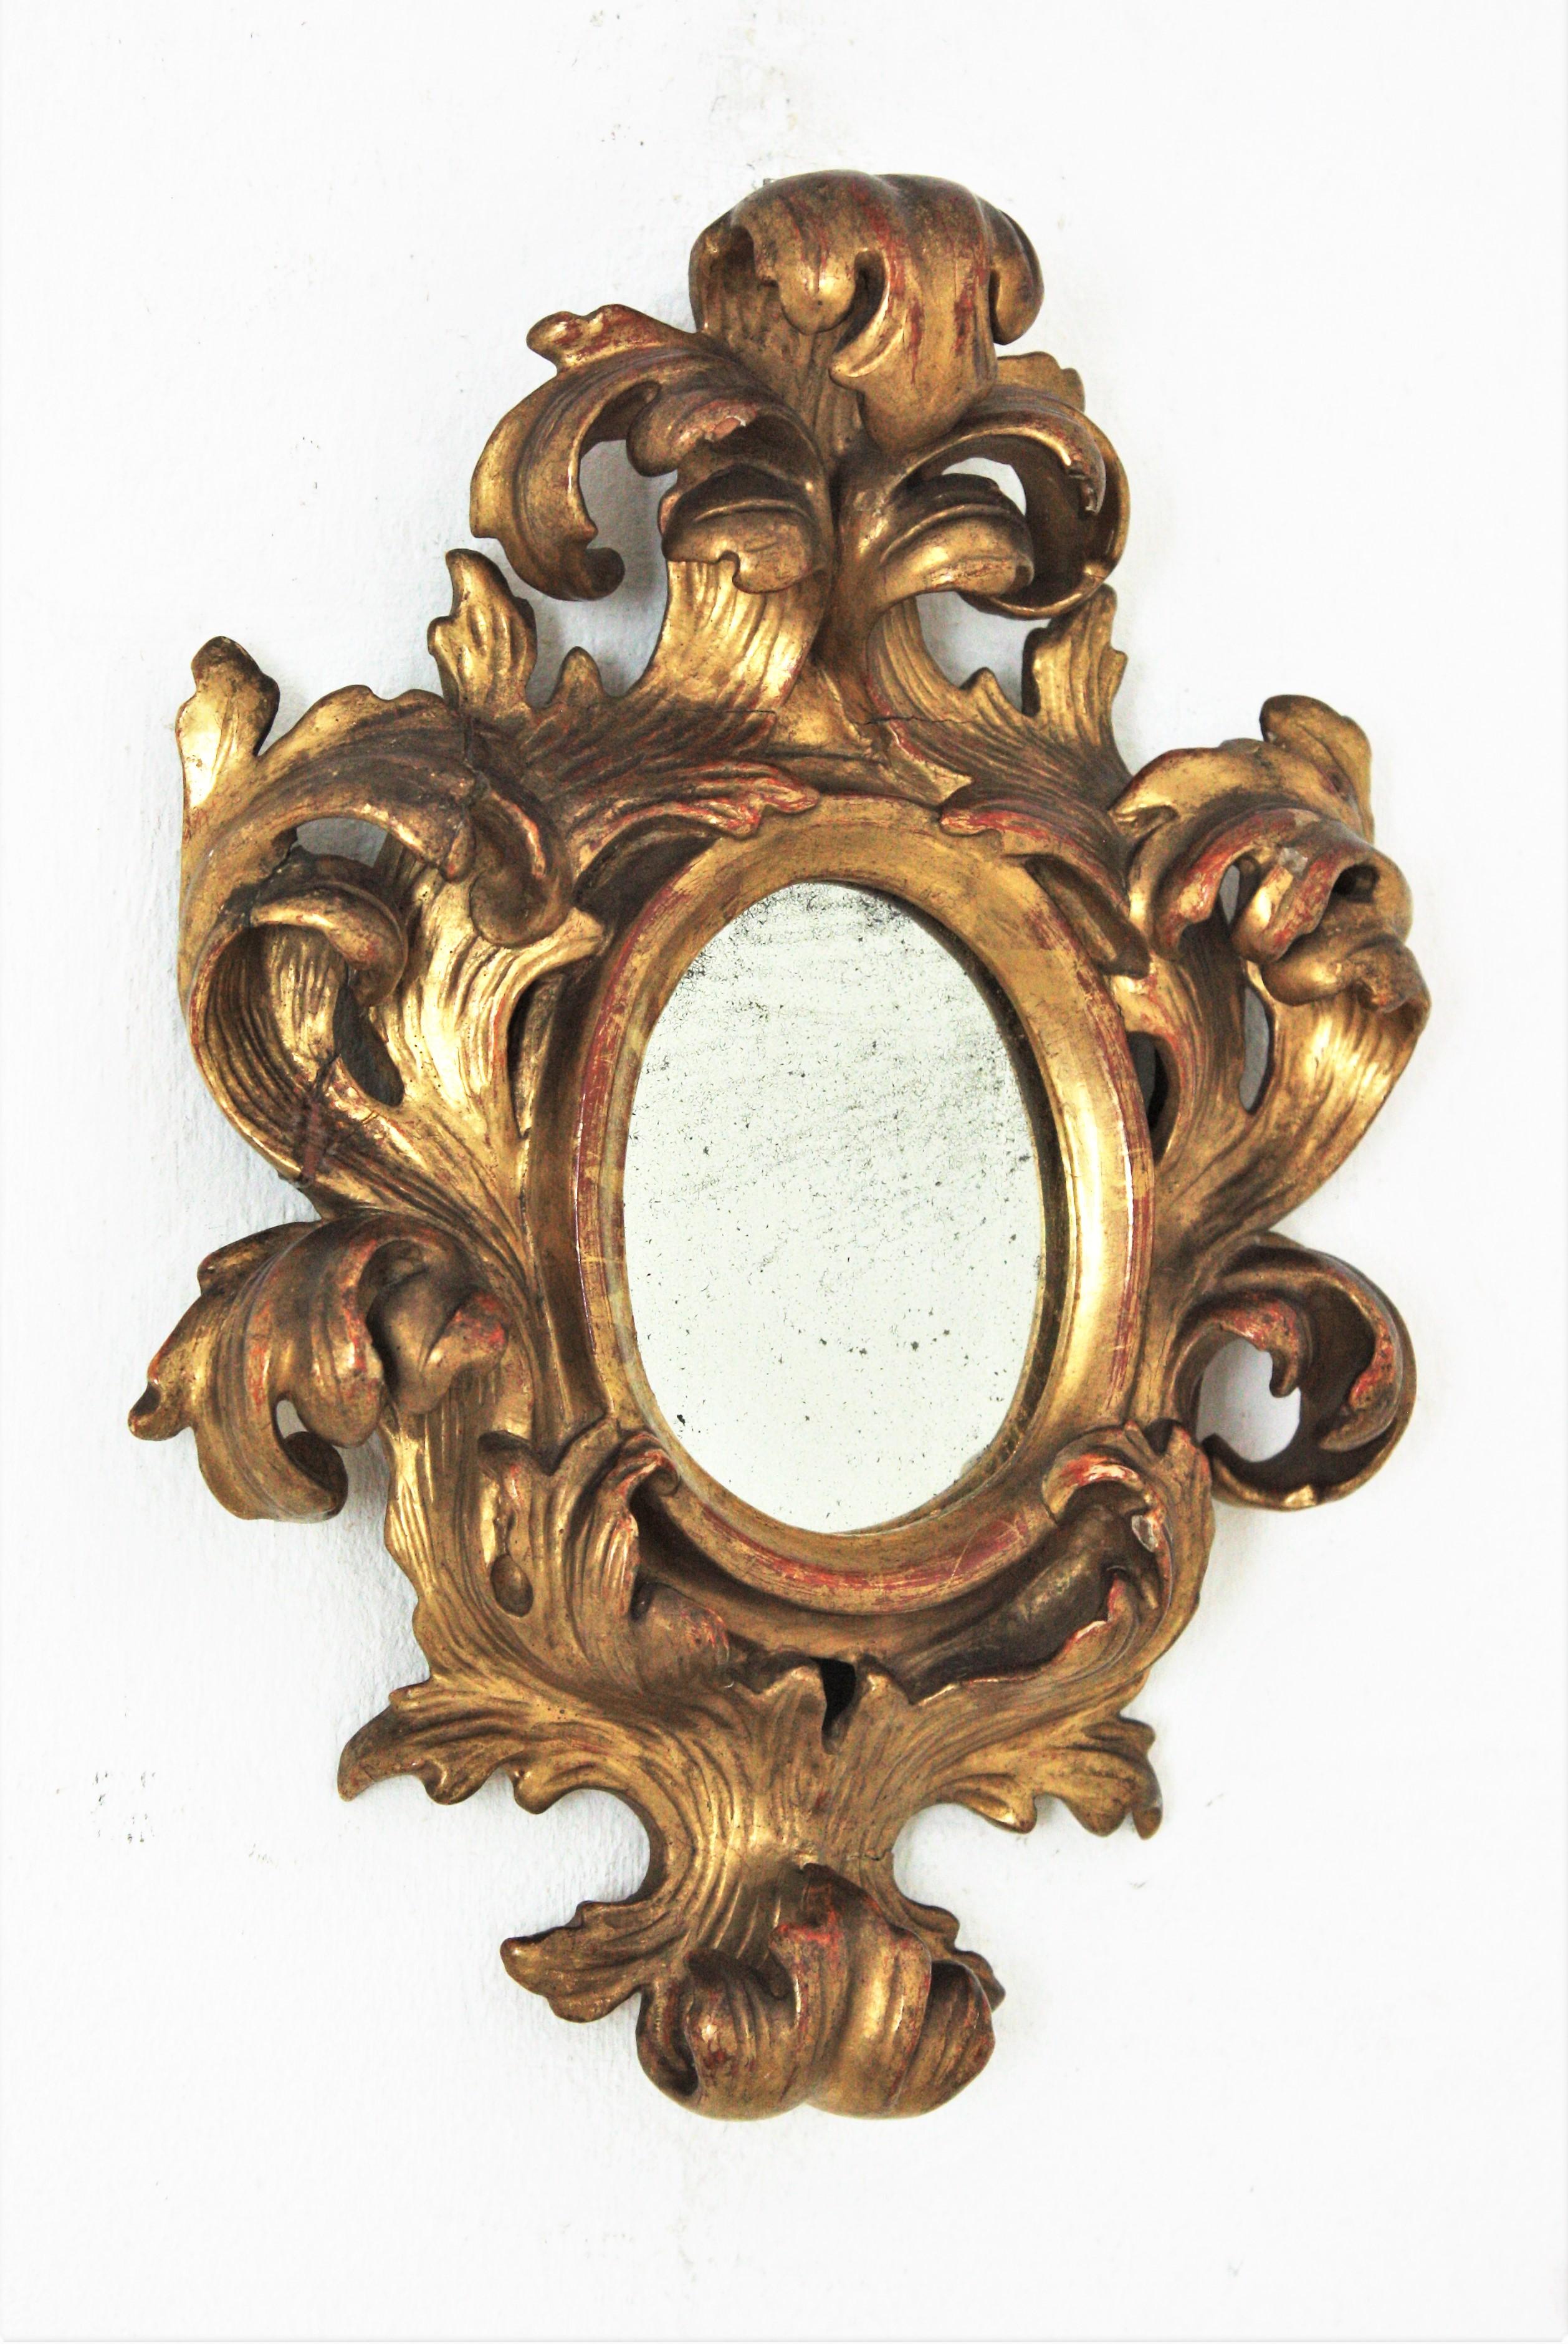 Rococo style mirror miniature with a carved giltwood frame and crest, Spain, 1940s.
A carved gold gilded foliage frame surrounding an oval shaped glass and a beautiful crest adorning the top. Finely carved details thorough.
This mirror is a rare